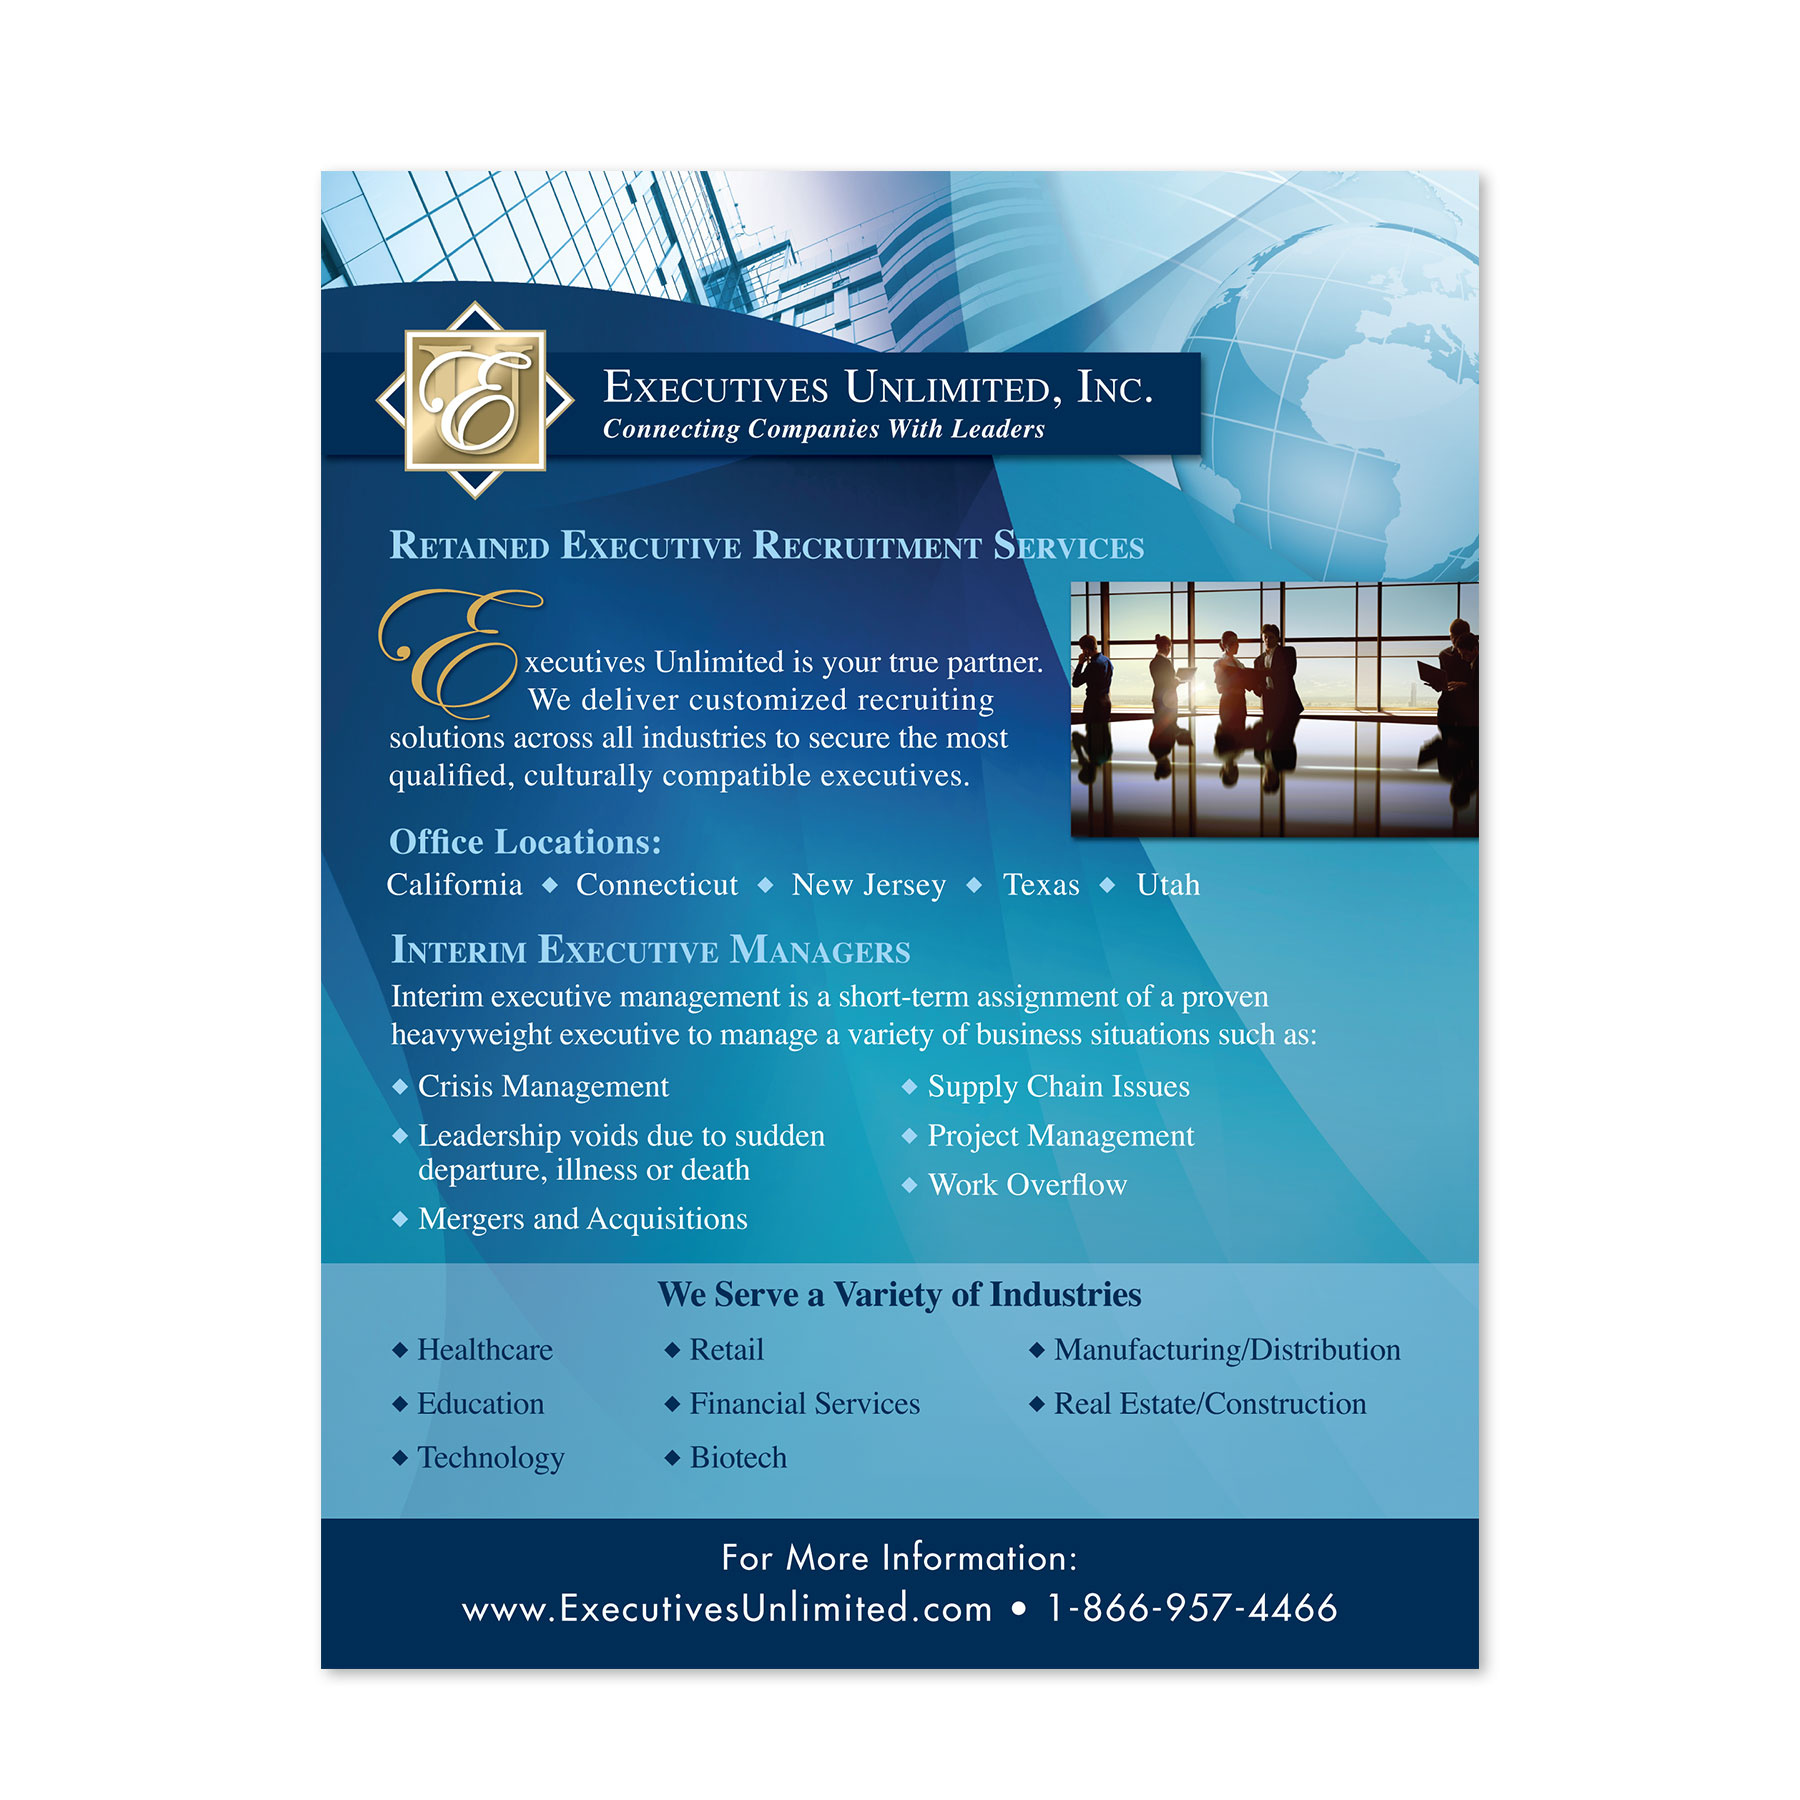 Executives Unlimited EMail Brochure